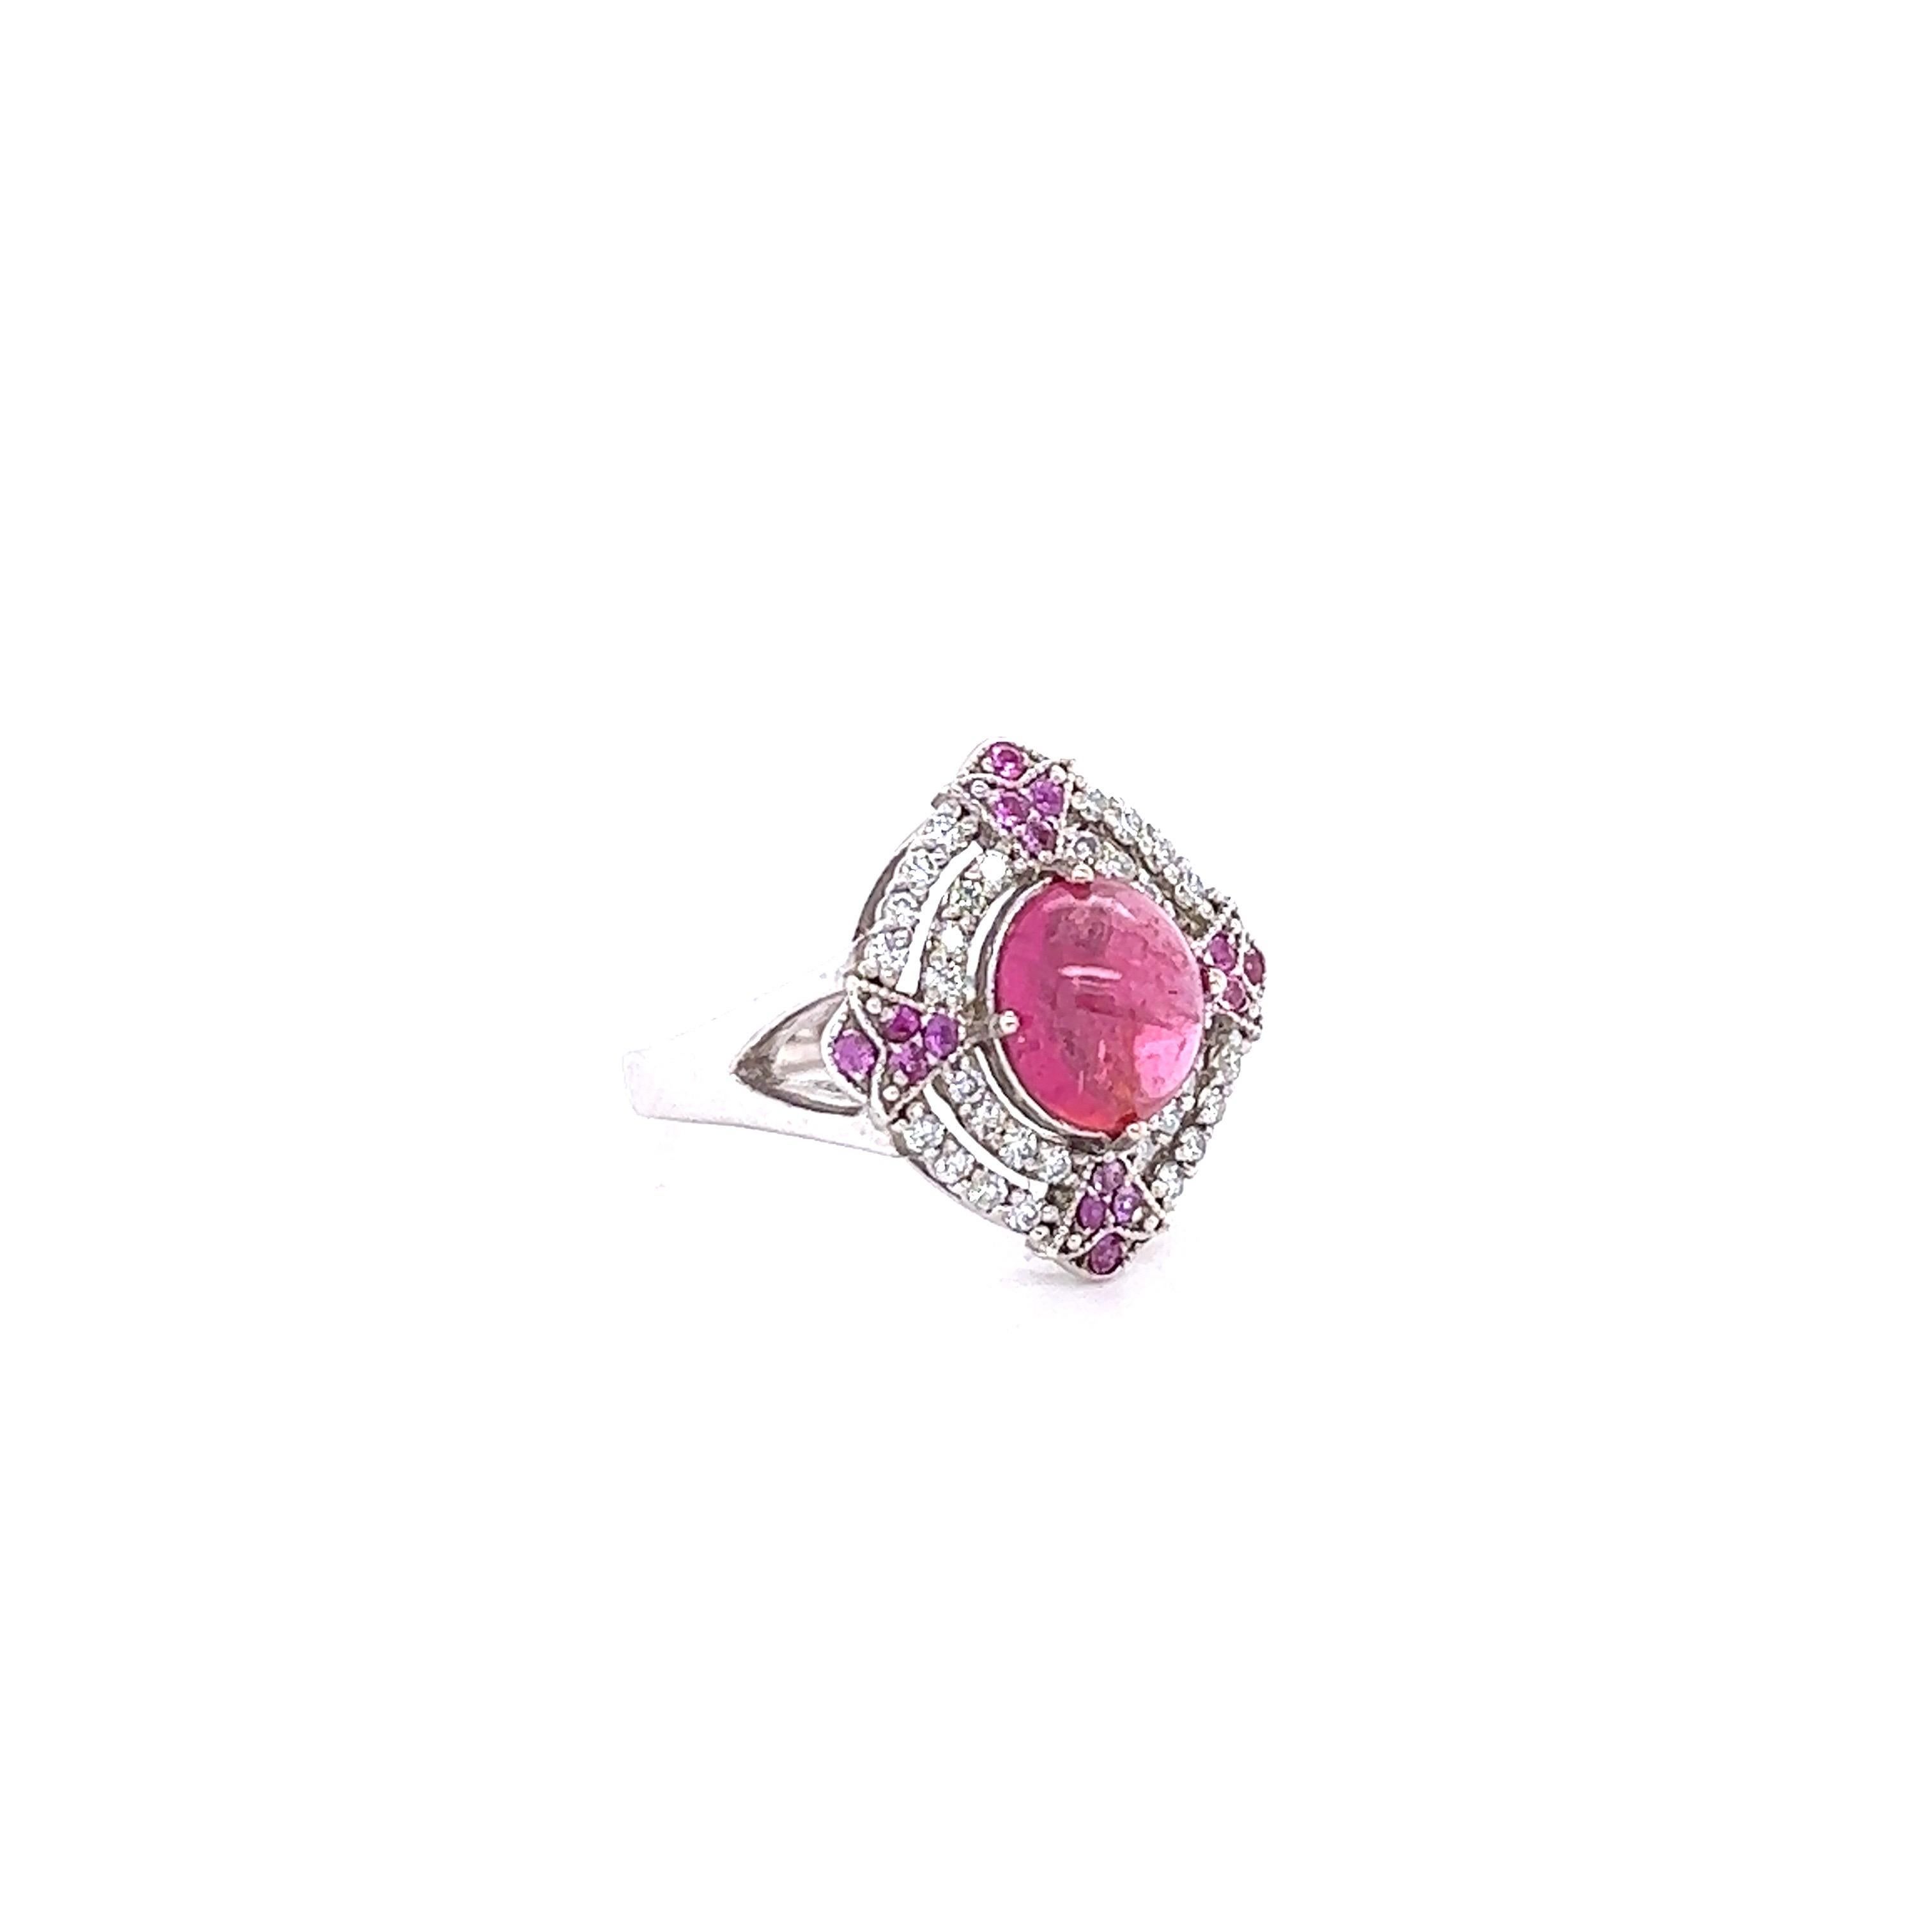 This ring has a Cabochon Pink Tourmaline that weighs 2.08 Carats and measures at approximately 8 mm x 6 mm. There are 32 Round Cut Diamonds that weigh 0.32 Carats. (Clarity: VS2, Color: H) and 16 Round Cut Pink Sapphires that weigh 0.17 carats.  The